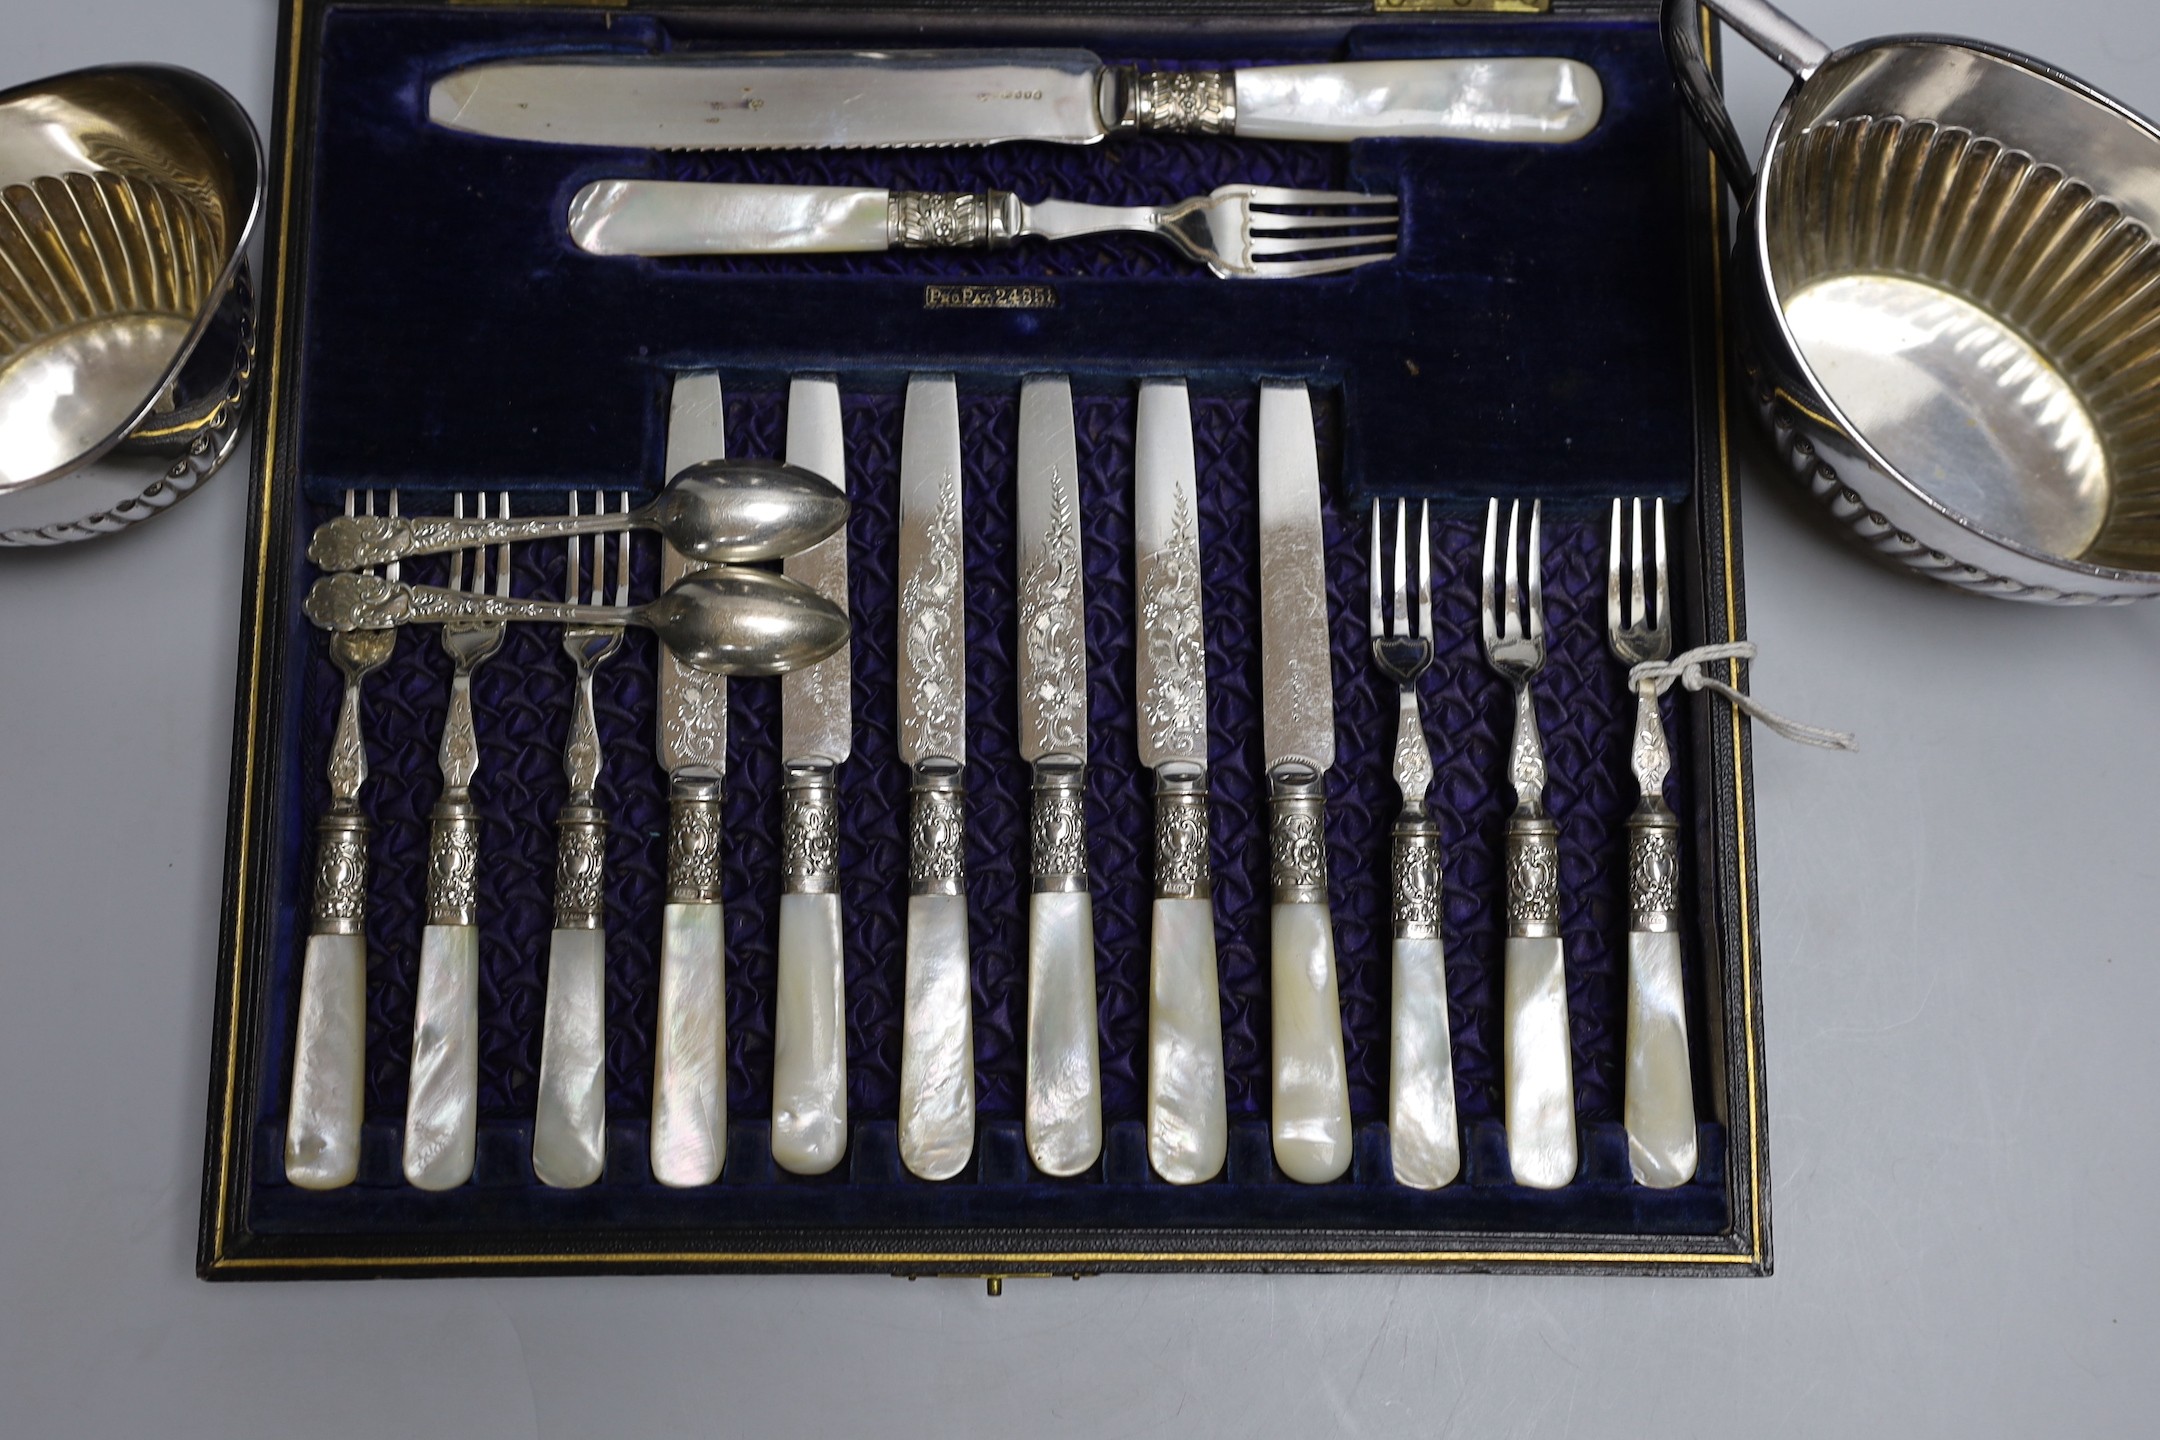 Six pairs of silver plated and engraved dessert knives and forks, with server, mother of pearl - Image 2 of 4